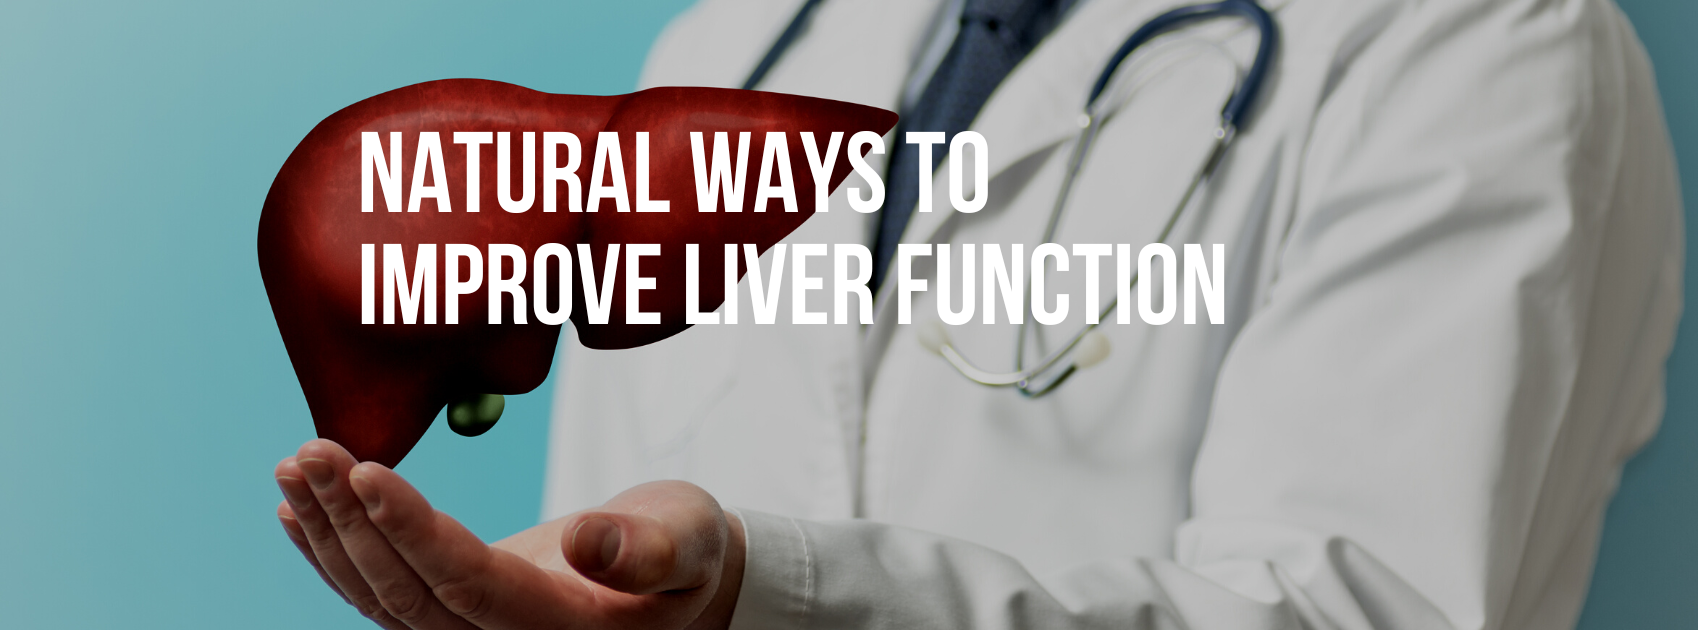 Natural Ways to Improve Liver Function